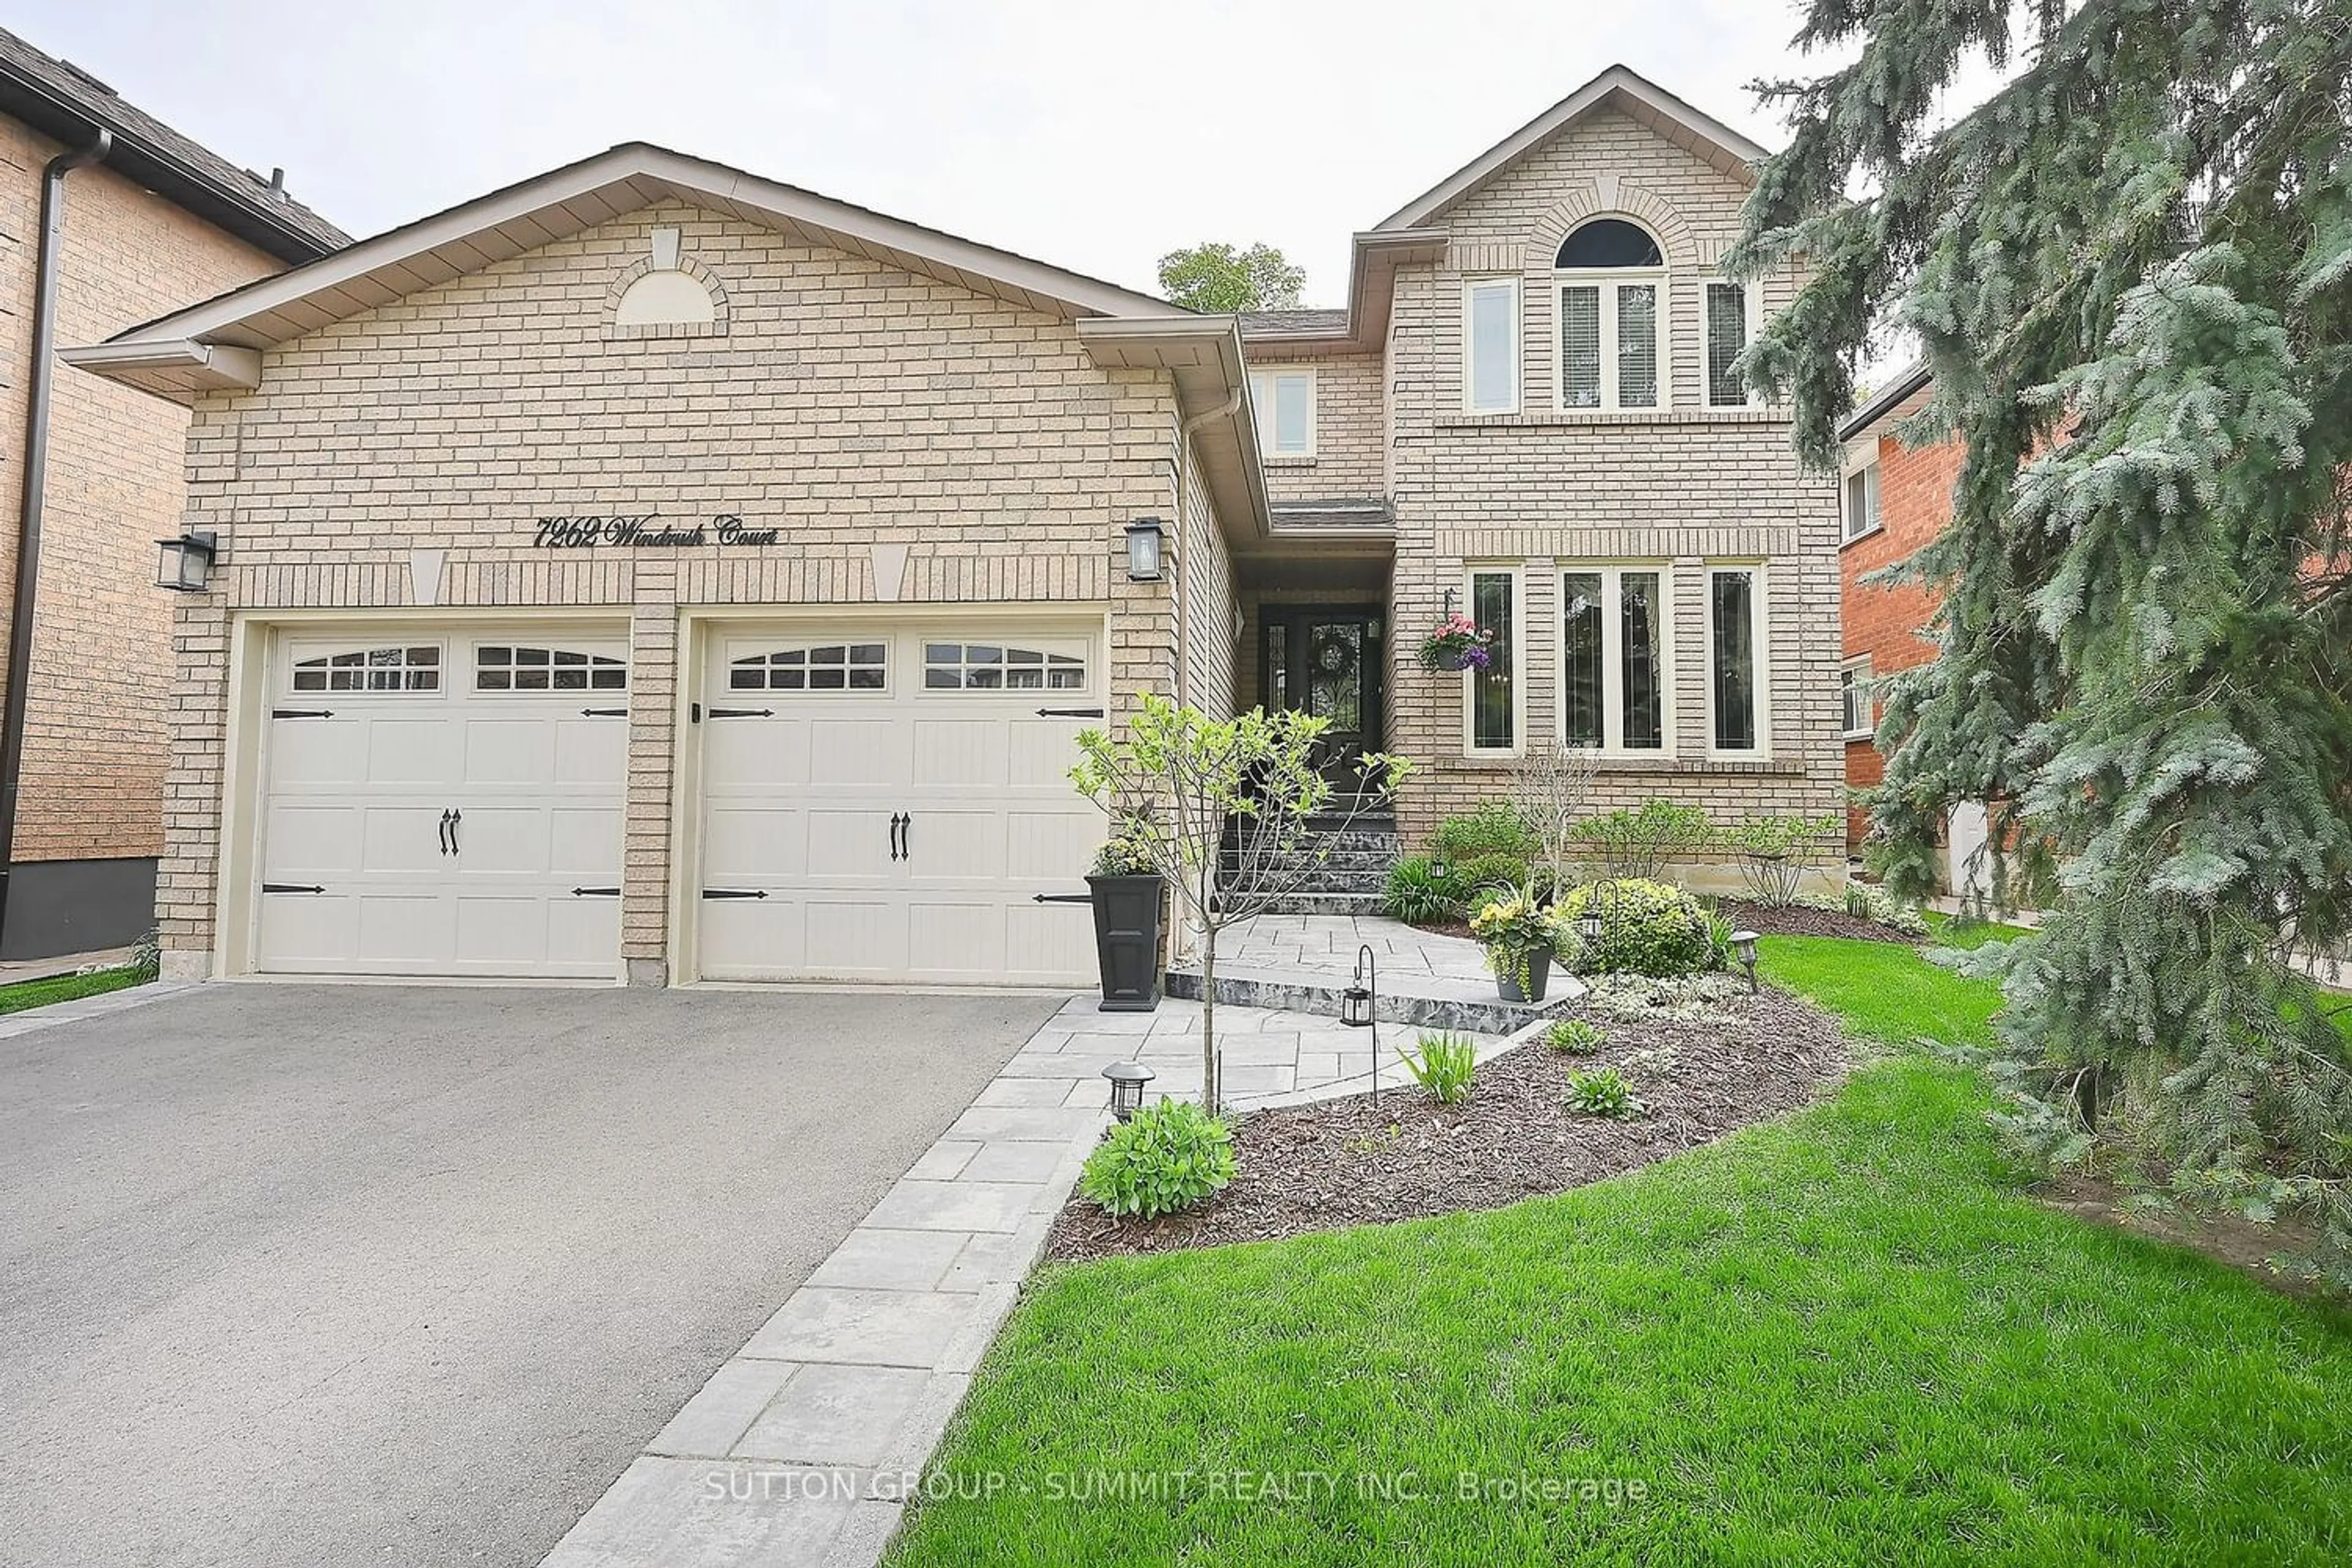 Home with brick exterior material for 7262 Windrush Crt, Mississauga Ontario L5N 6K2